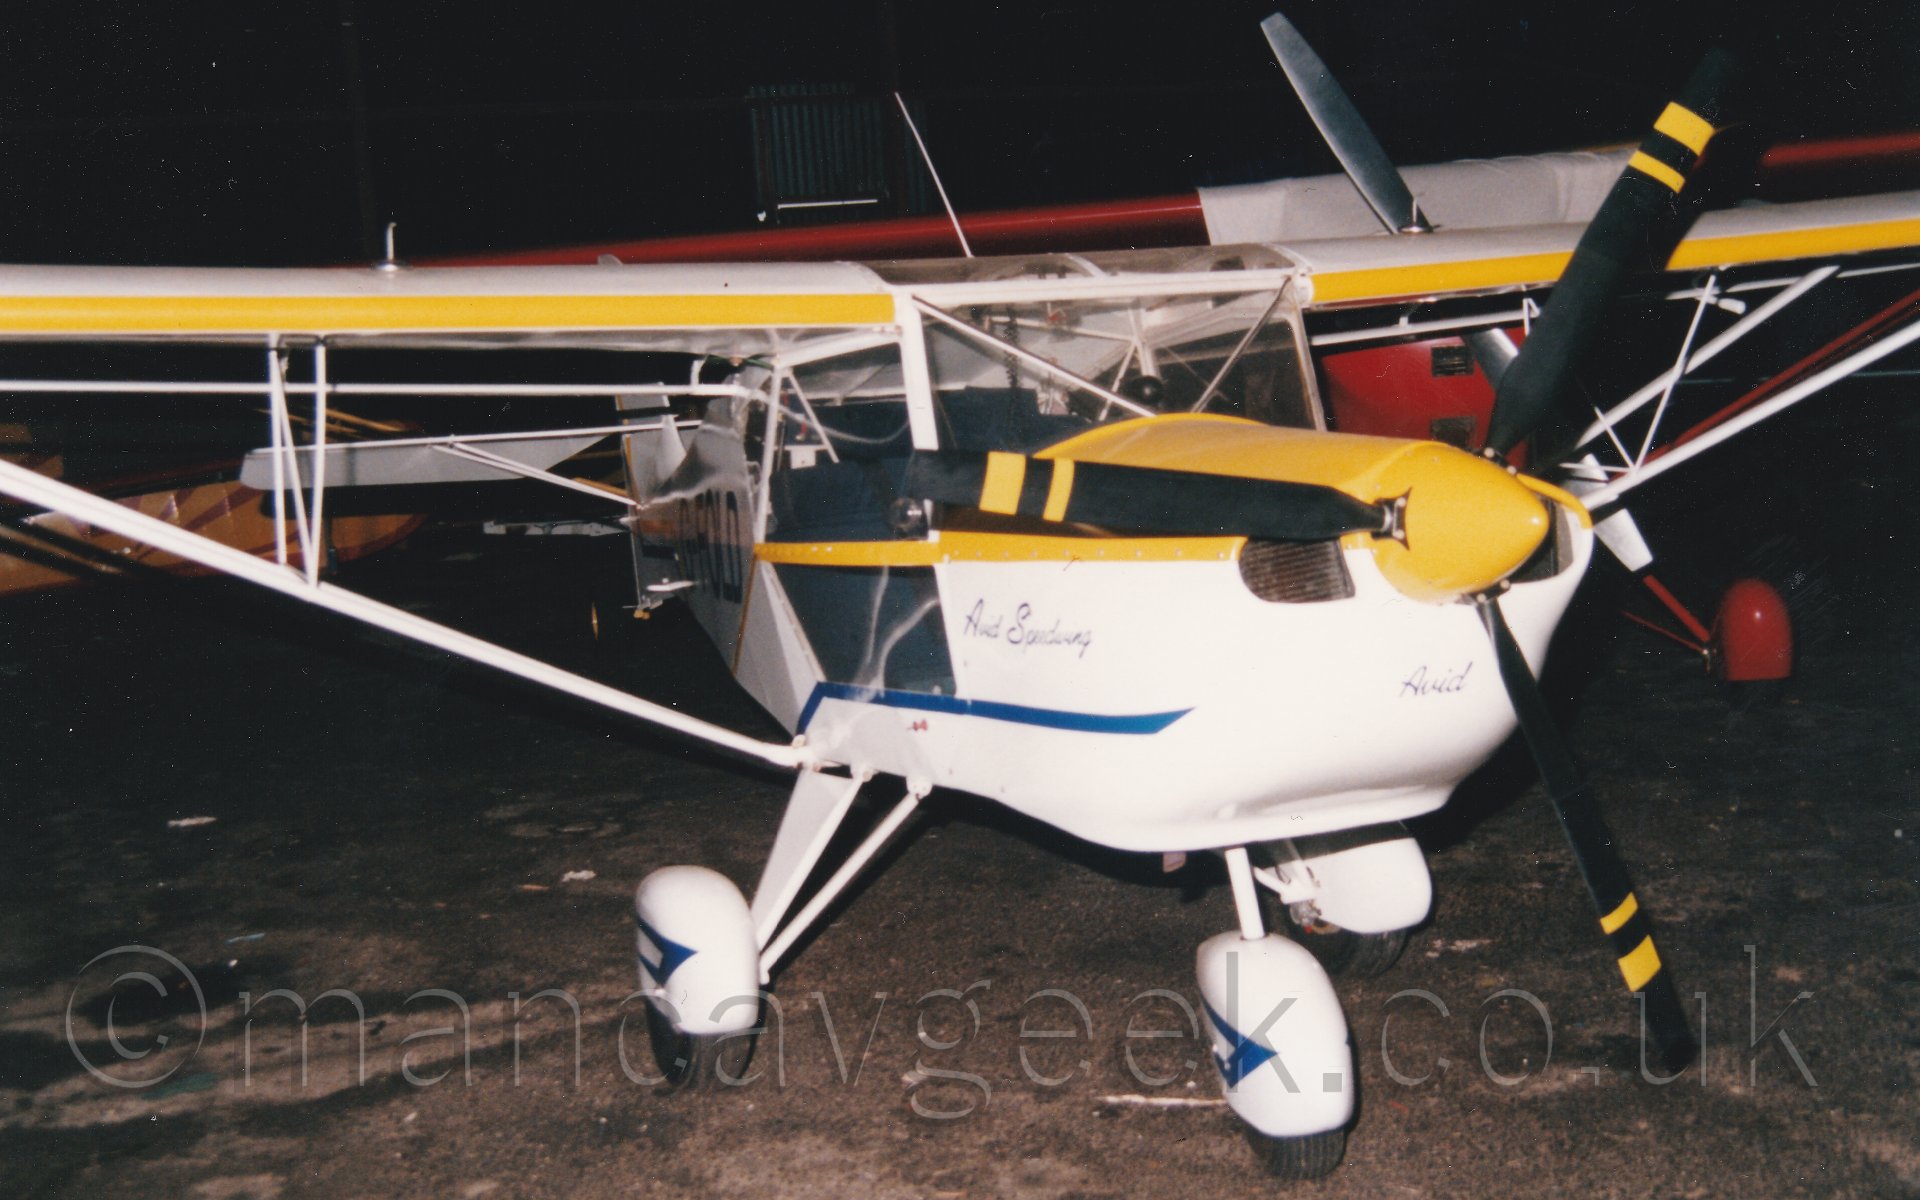 Front view of a high-winged, single seat light aircraft parked in a rather dim hangar. The plane is mostly white, with with a blue stripe running along the lower parts of the body and the wheel spats, and a yellow stripe running along the body from the yellow top engine cowlling panel. The registration "G-FOLD" is just discernable on the rear fuselage, with smaller blue "Avid" titles under the propellor, and "Avid Speedwing" on the side of the engine cowling, both in an italic font. IN the backb=ground, several other light aircraft can be seen in the murky depths of the hangar.